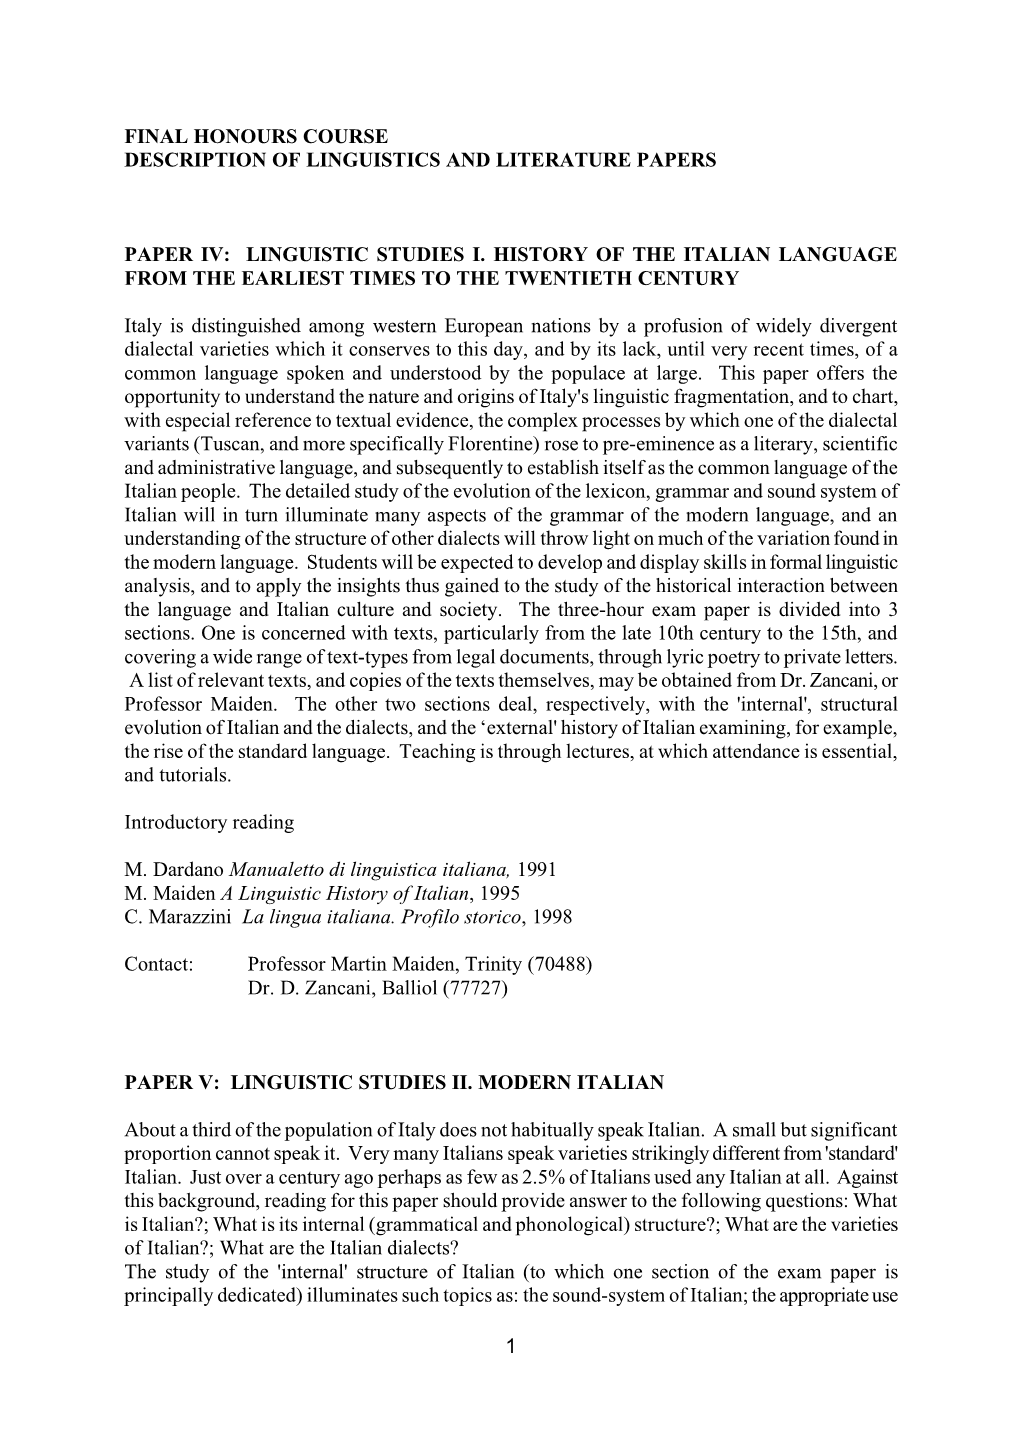 Linguistic Studies I. History of the Italian Language from the Earliest Times to the Twentieth Century